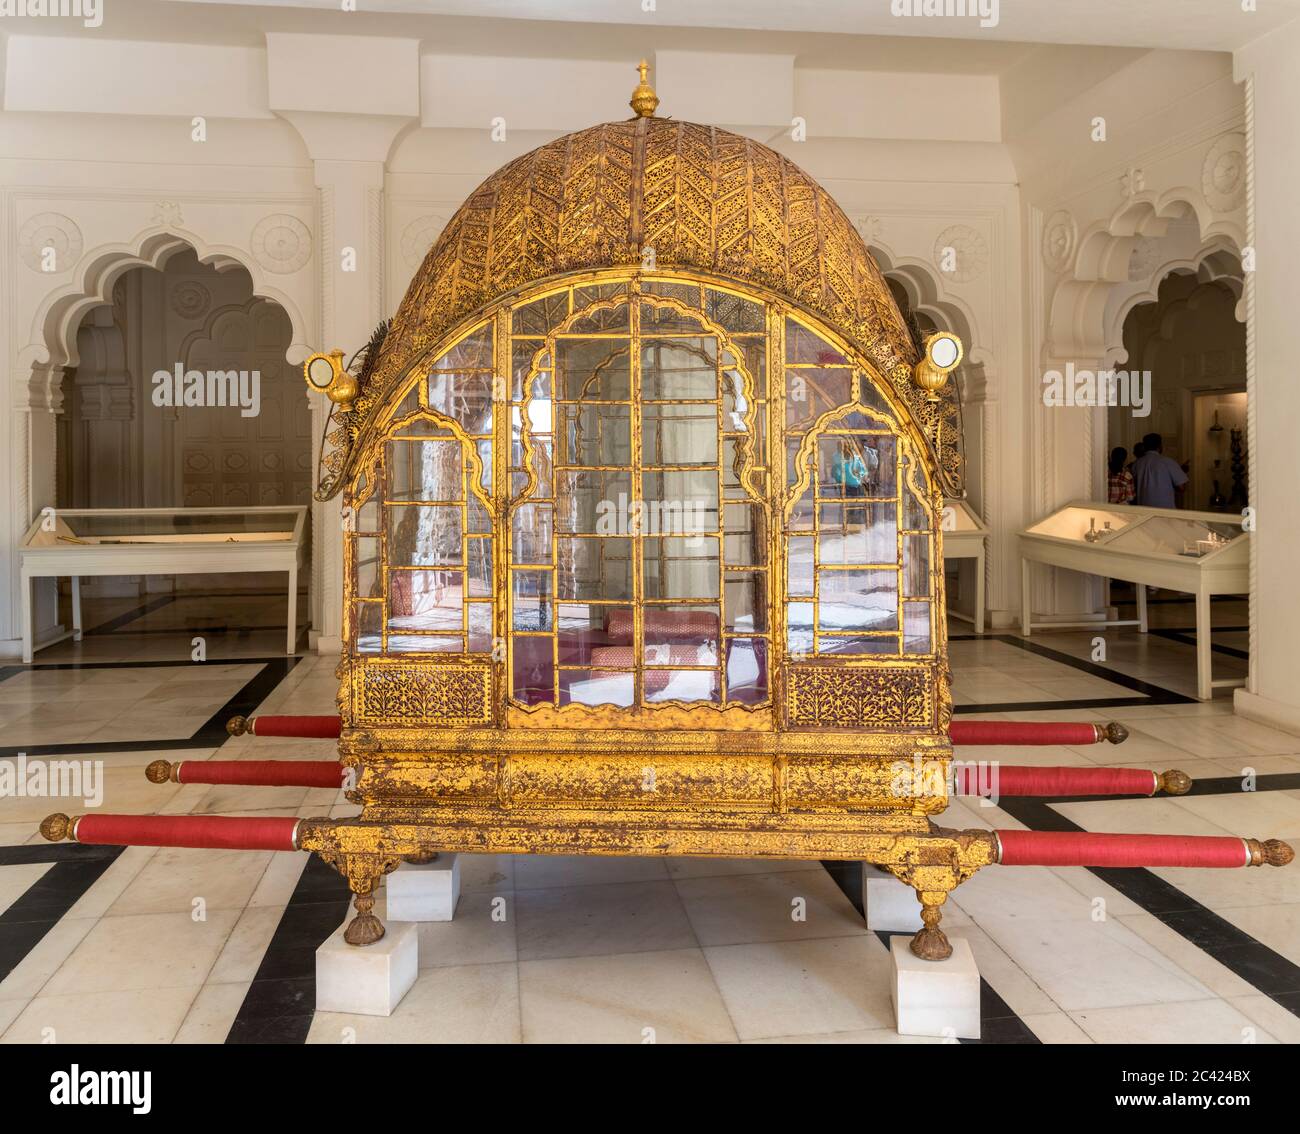 The Great Palanquin (Palanquin Mahadol), made in Gujarat in the 18th century, Mehrangarh Fort, Jodhpur, Rajasthan, India Stock Photo